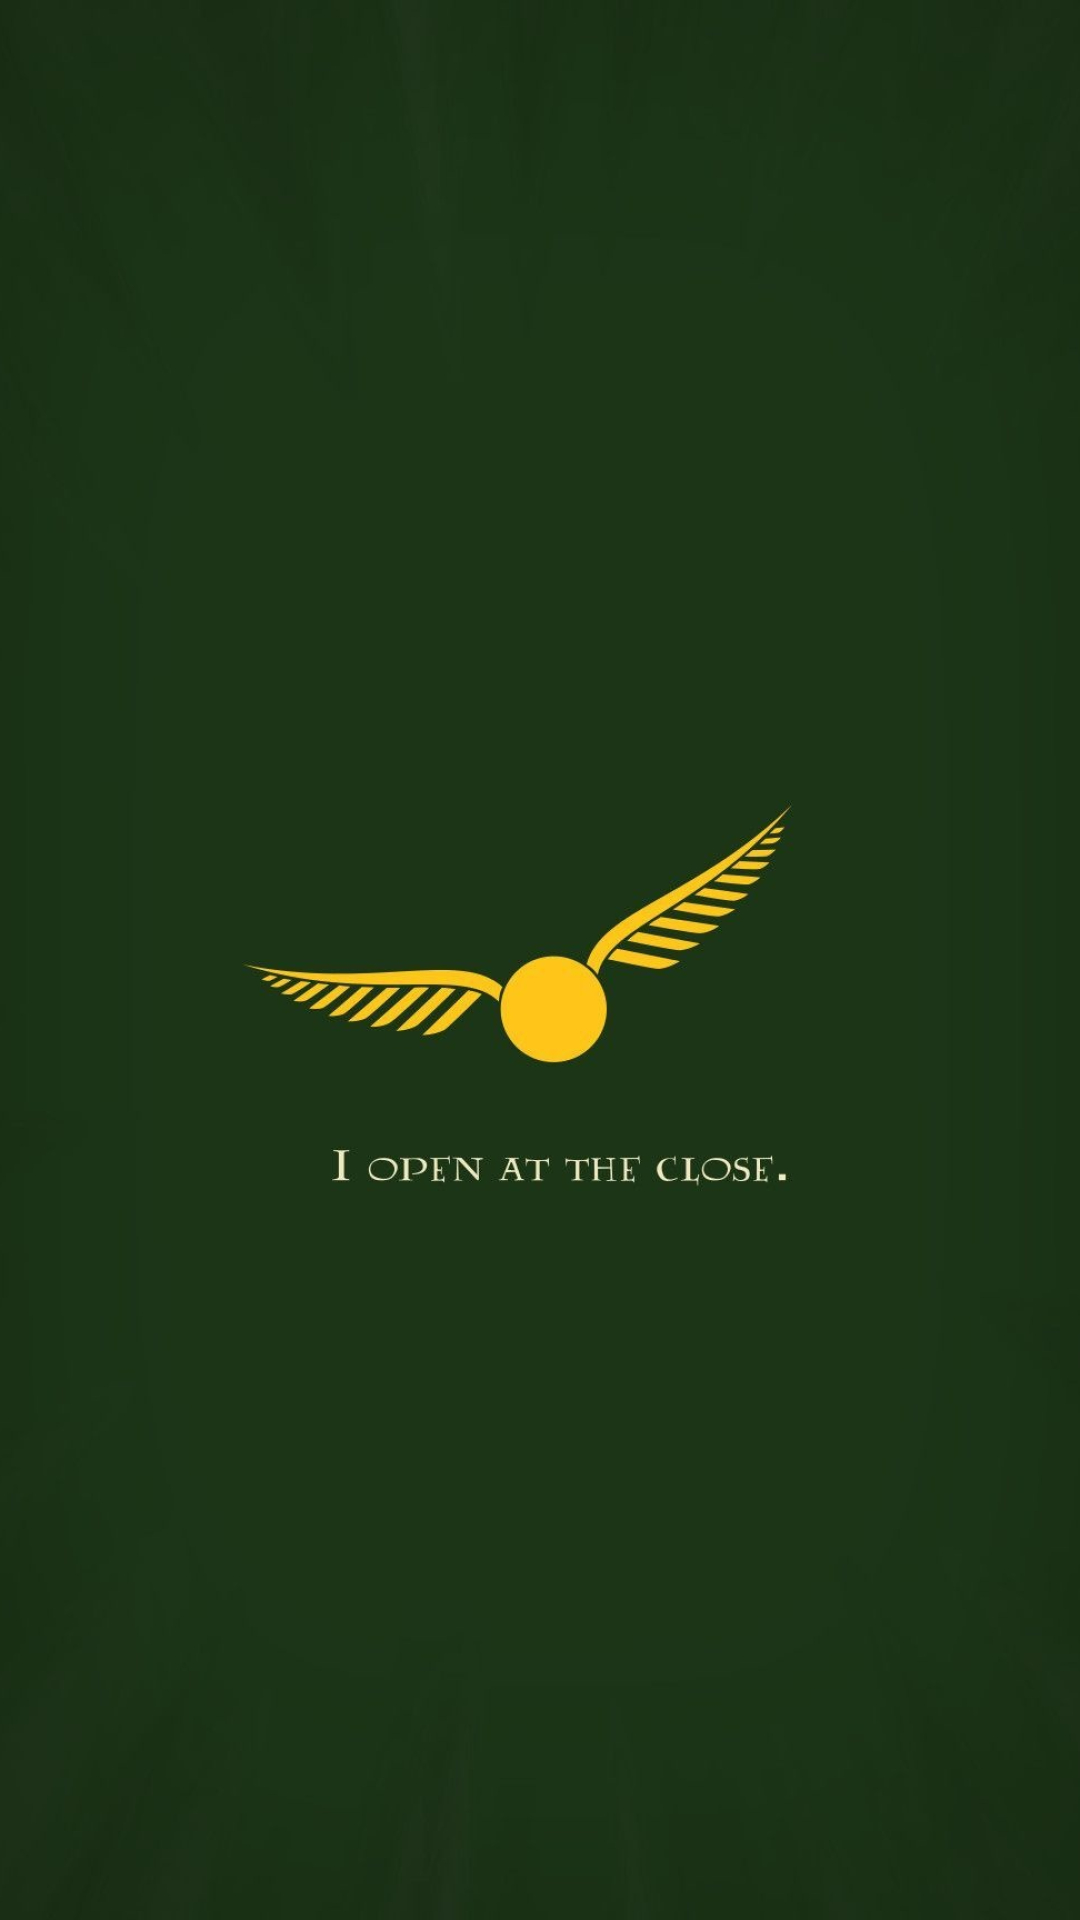 Slytherin Quidditch team, Seeker wallpapers, Cunning tactics, House unity, 1080x1920 Full HD Handy